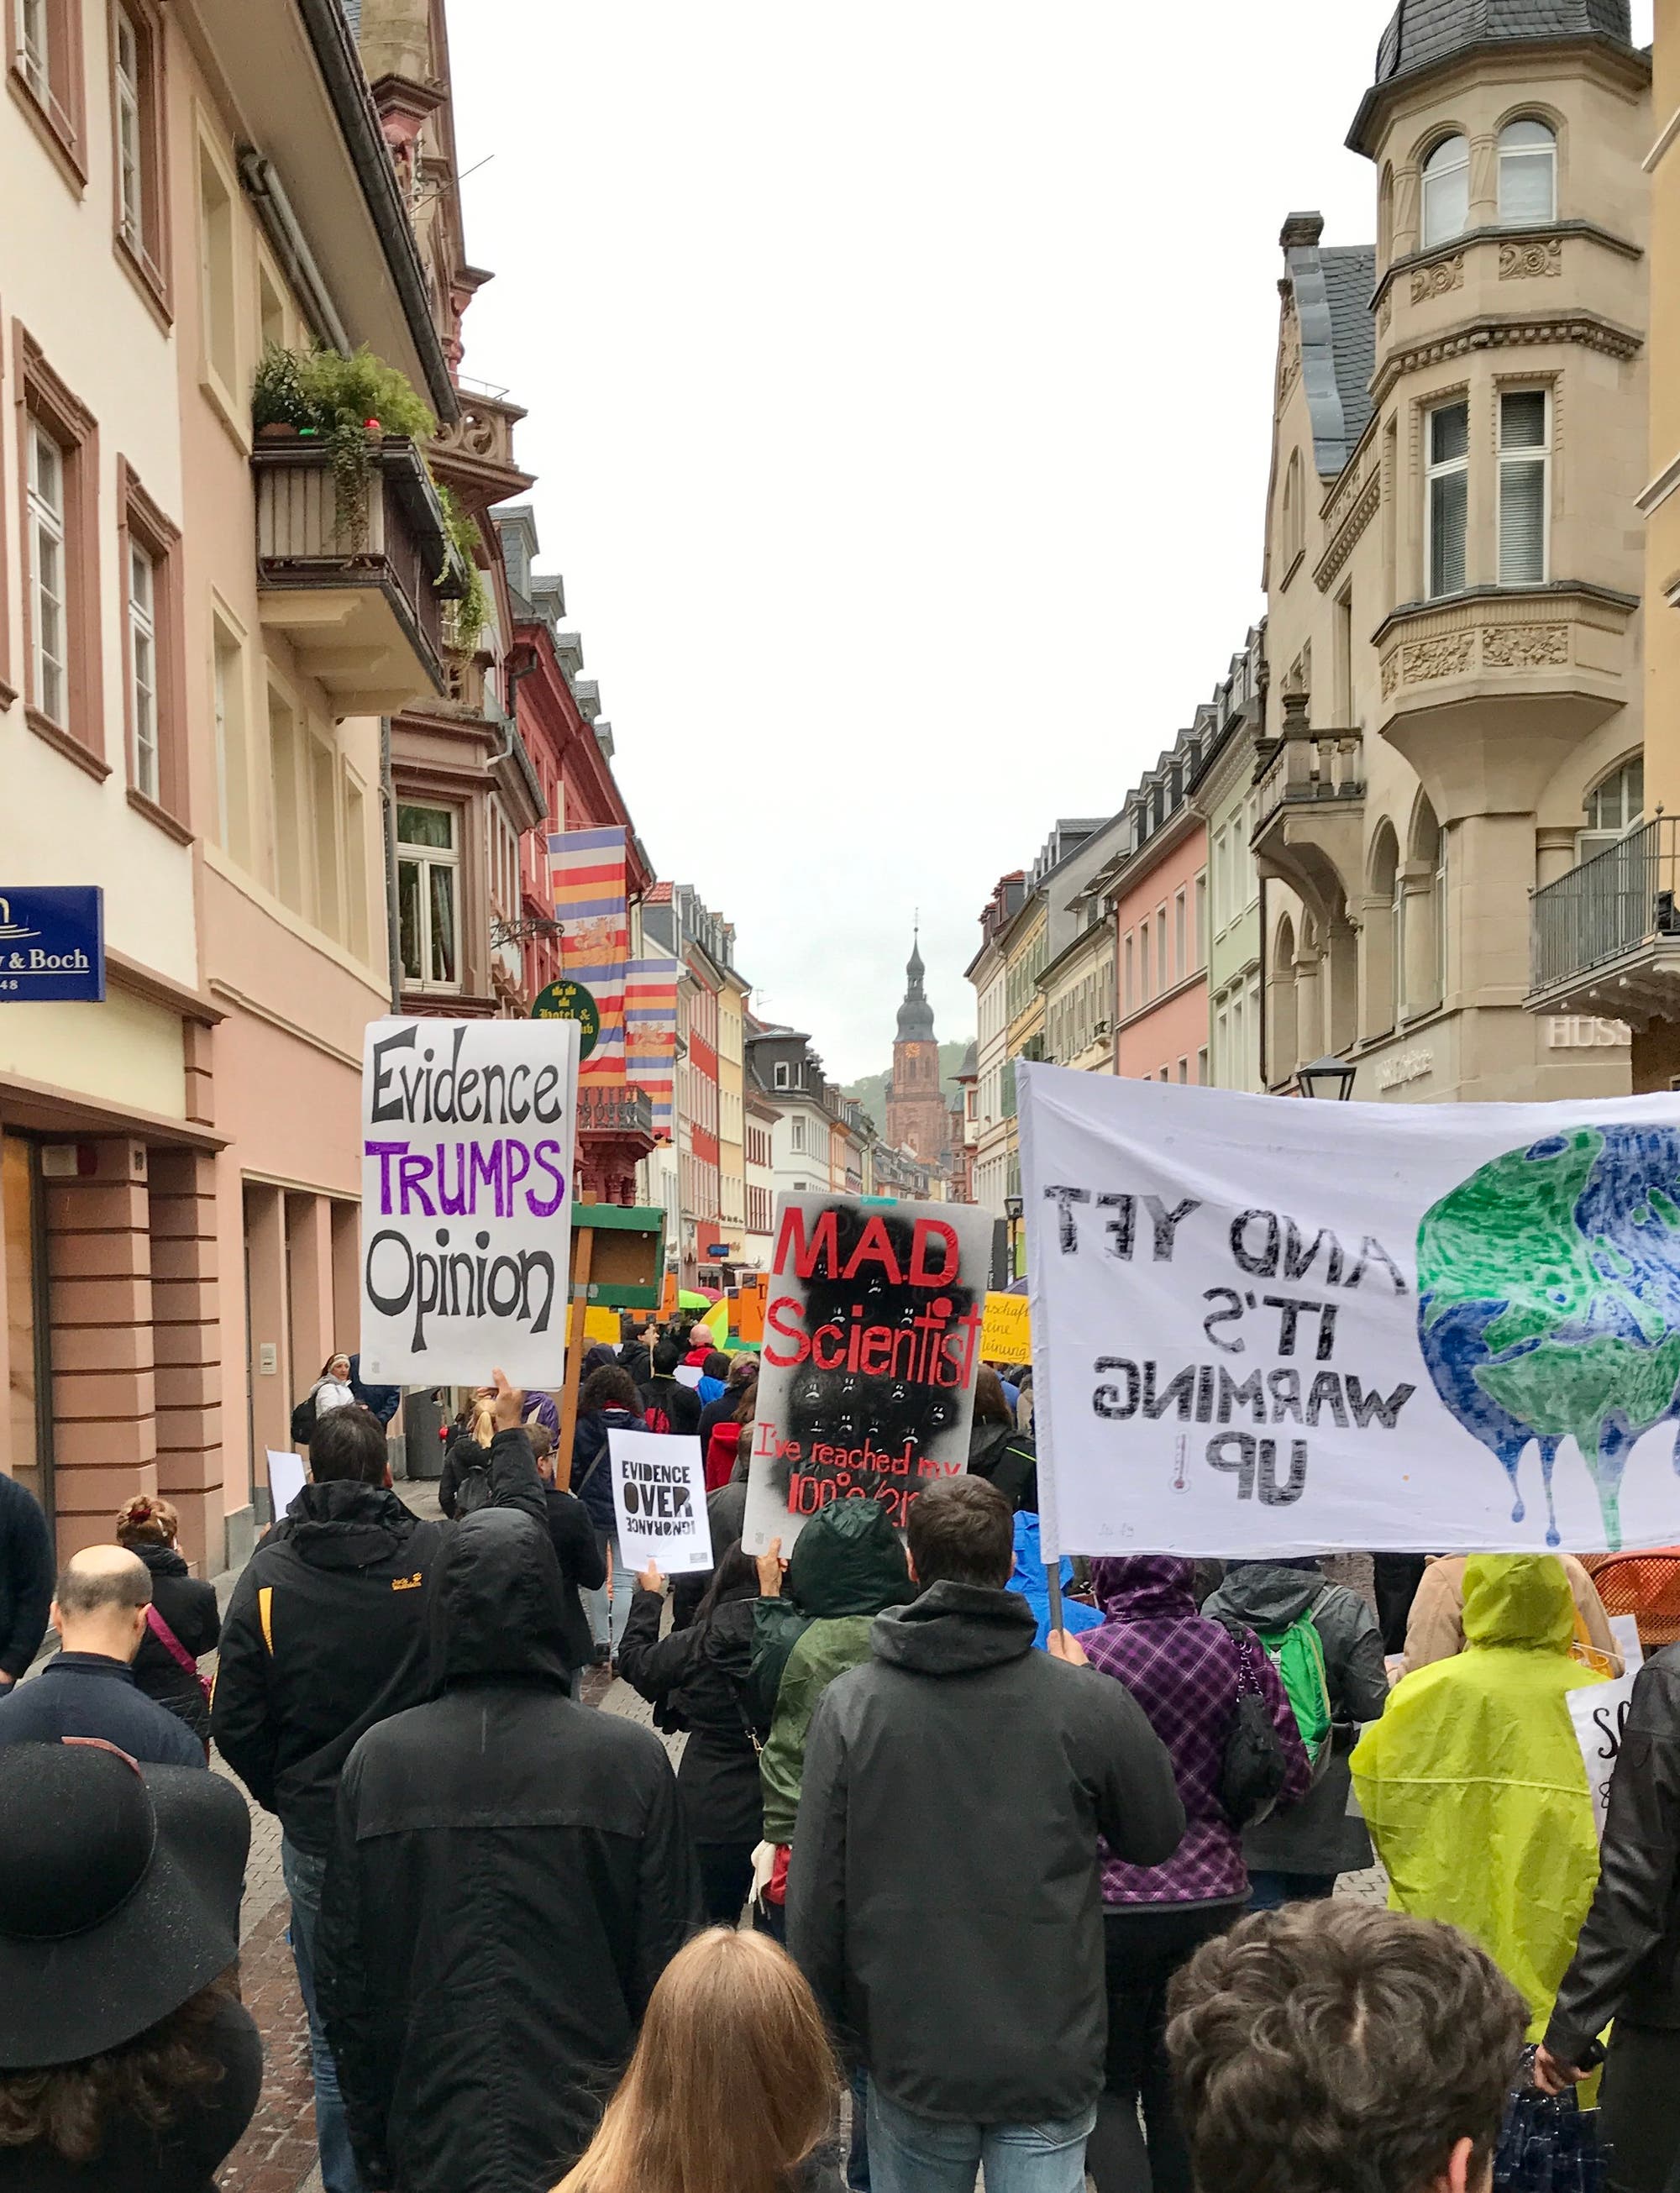 March for Science Heidelberg